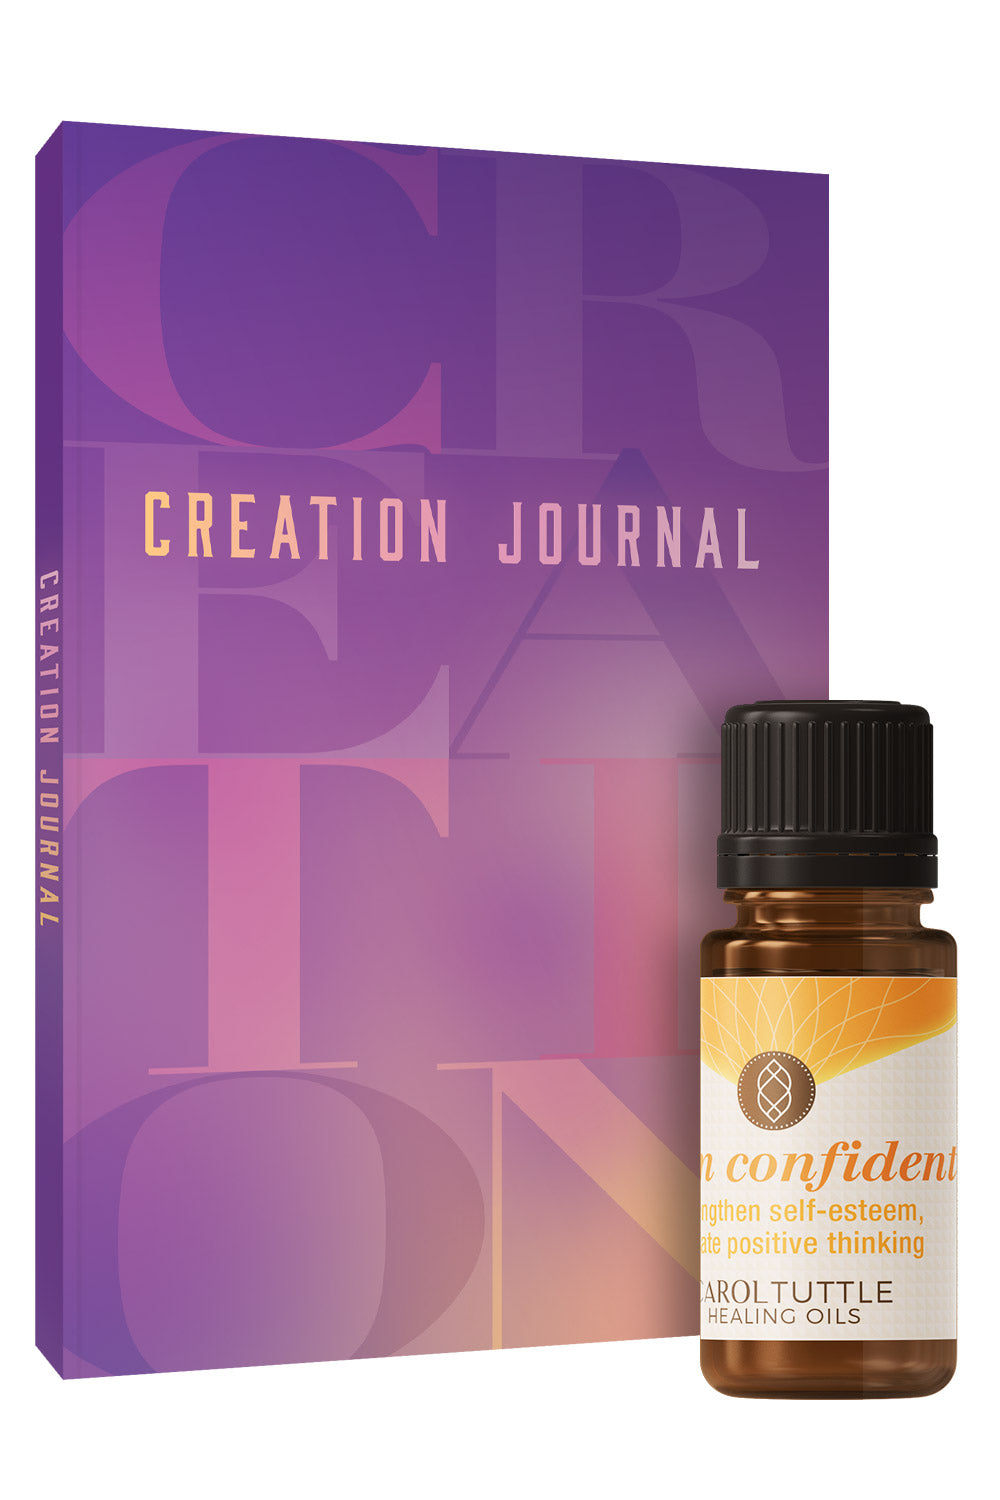 Creation Journal with I am confident Oil Bundle